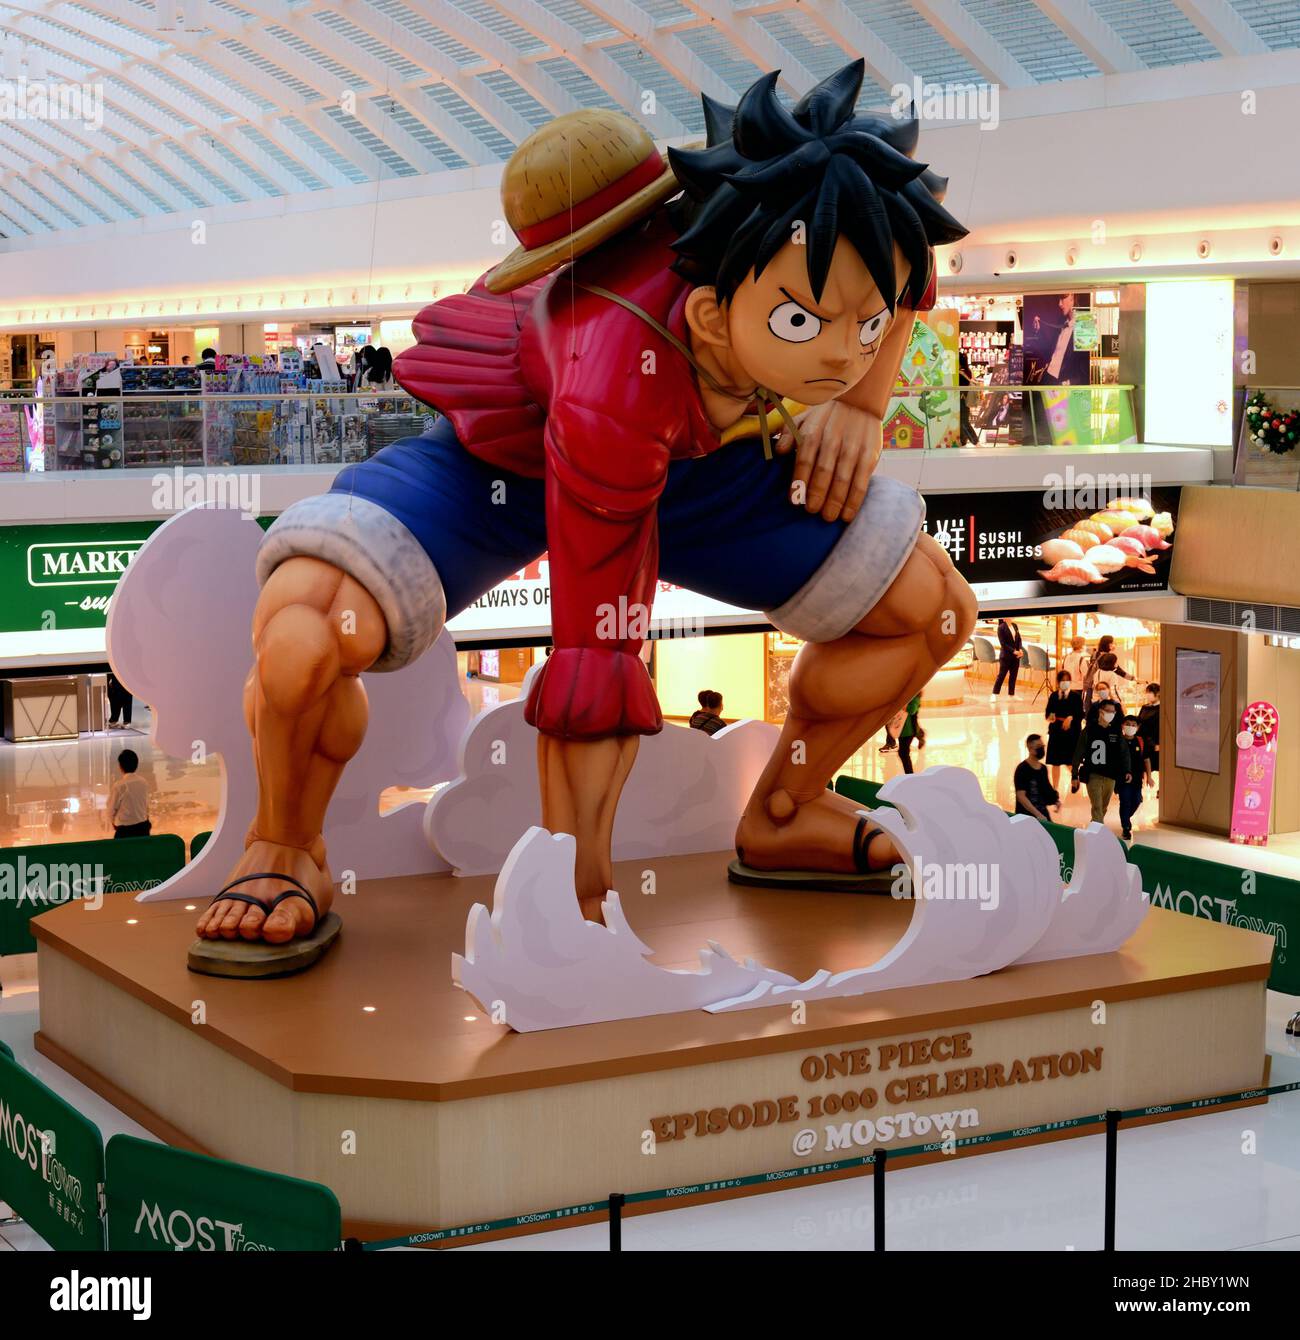 On podium inside a shopping arcade displays an inflatable figure of Luffy, the protagonist of Japanese manga One Piece Stock Photo